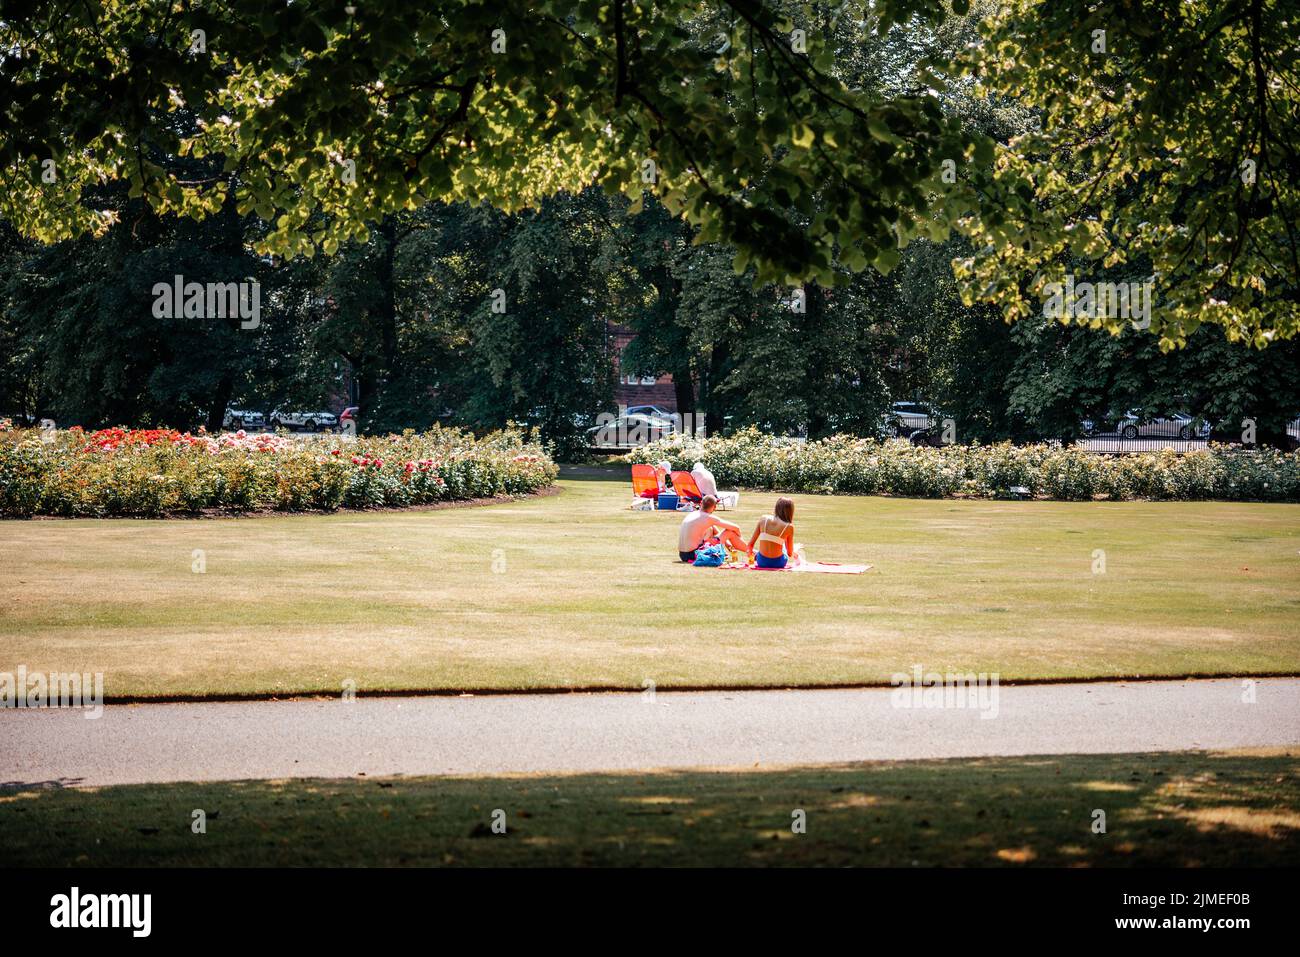 People are sunbathing on the grass in the park in the UK Stock Photo